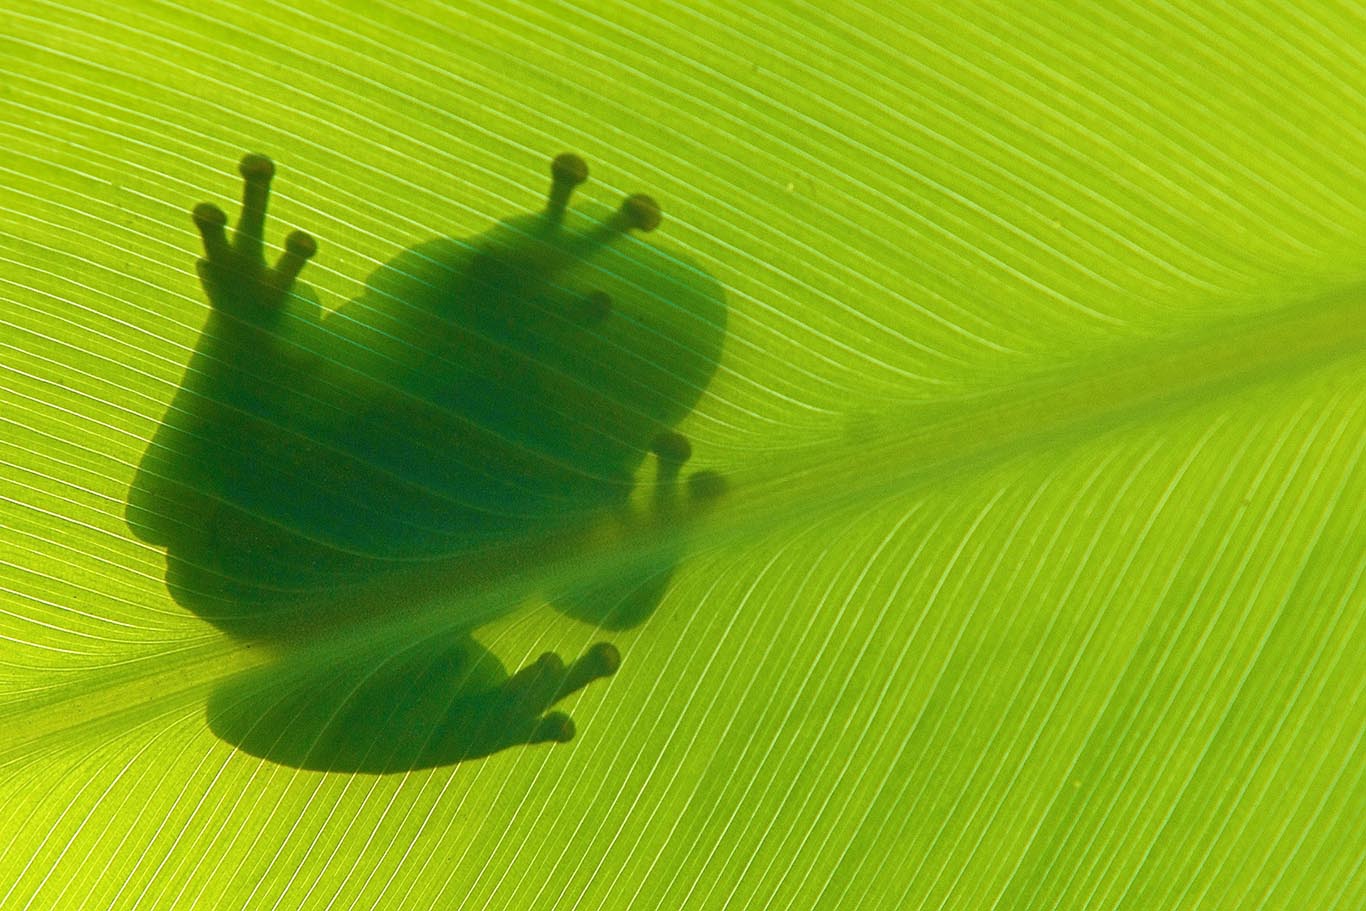 Silhouette of a green tree frog sitting on top of a leaf.